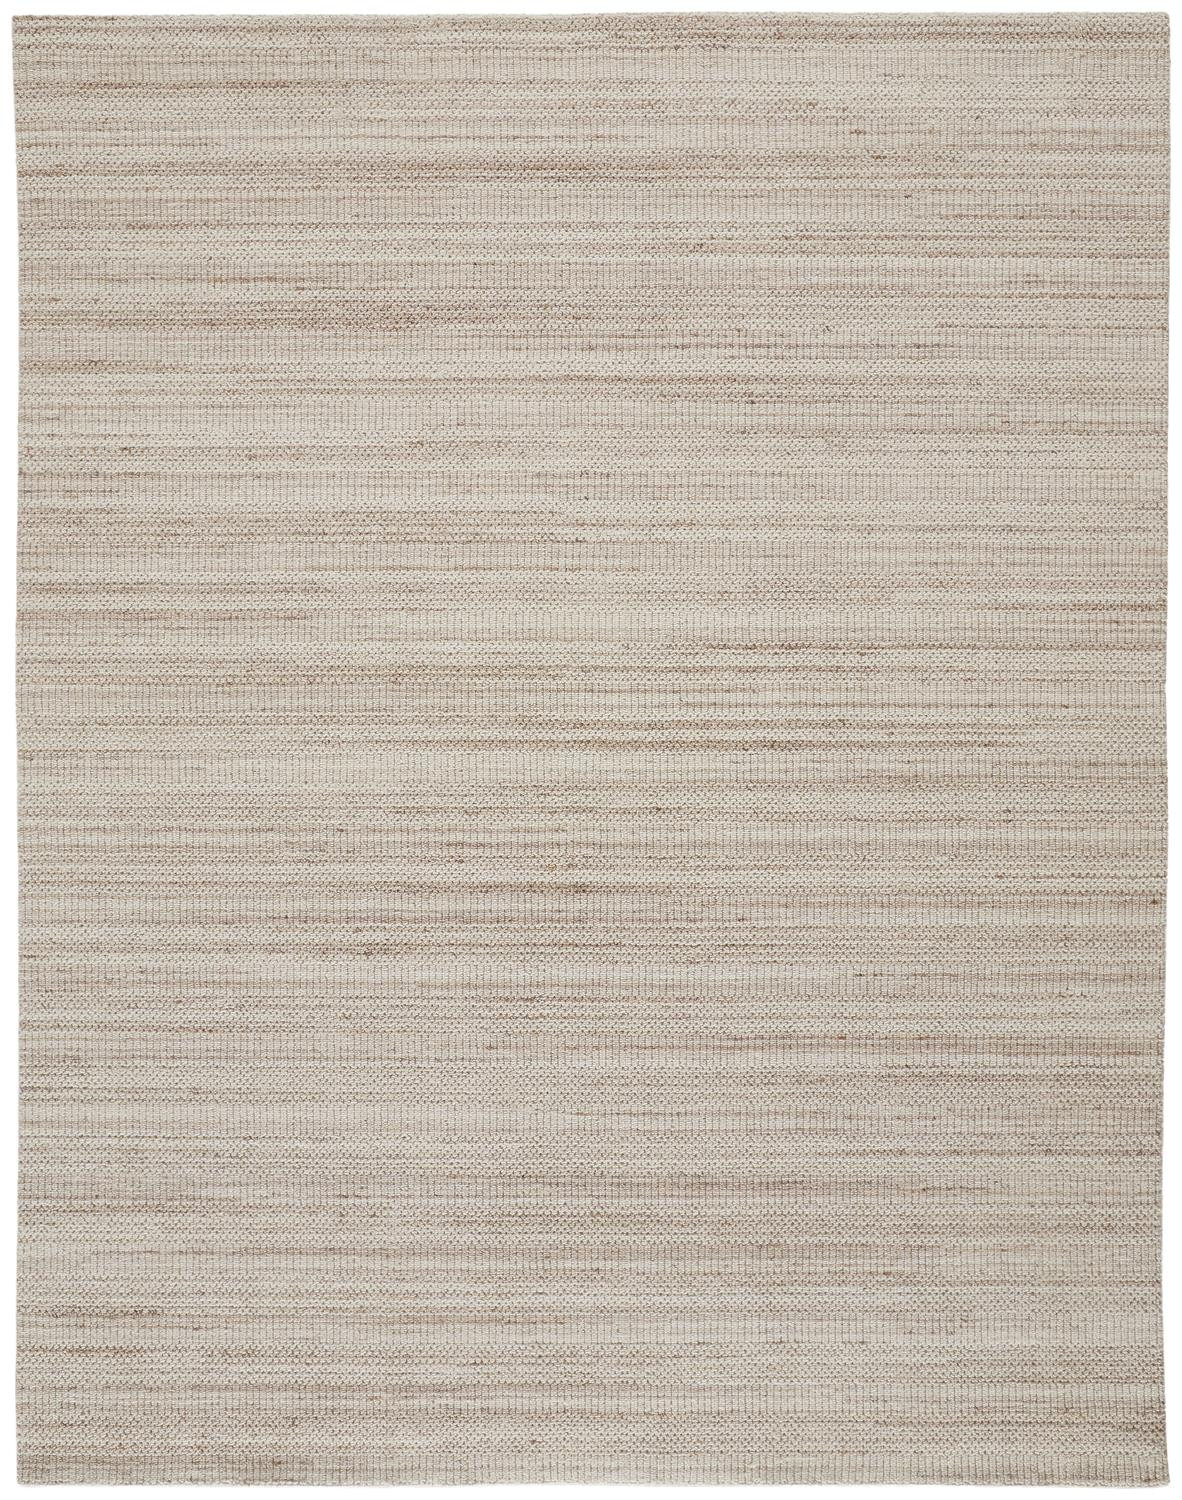 8' X 10' Ivory Wool Hand Woven Stain Resistant Area Rug-514040-1